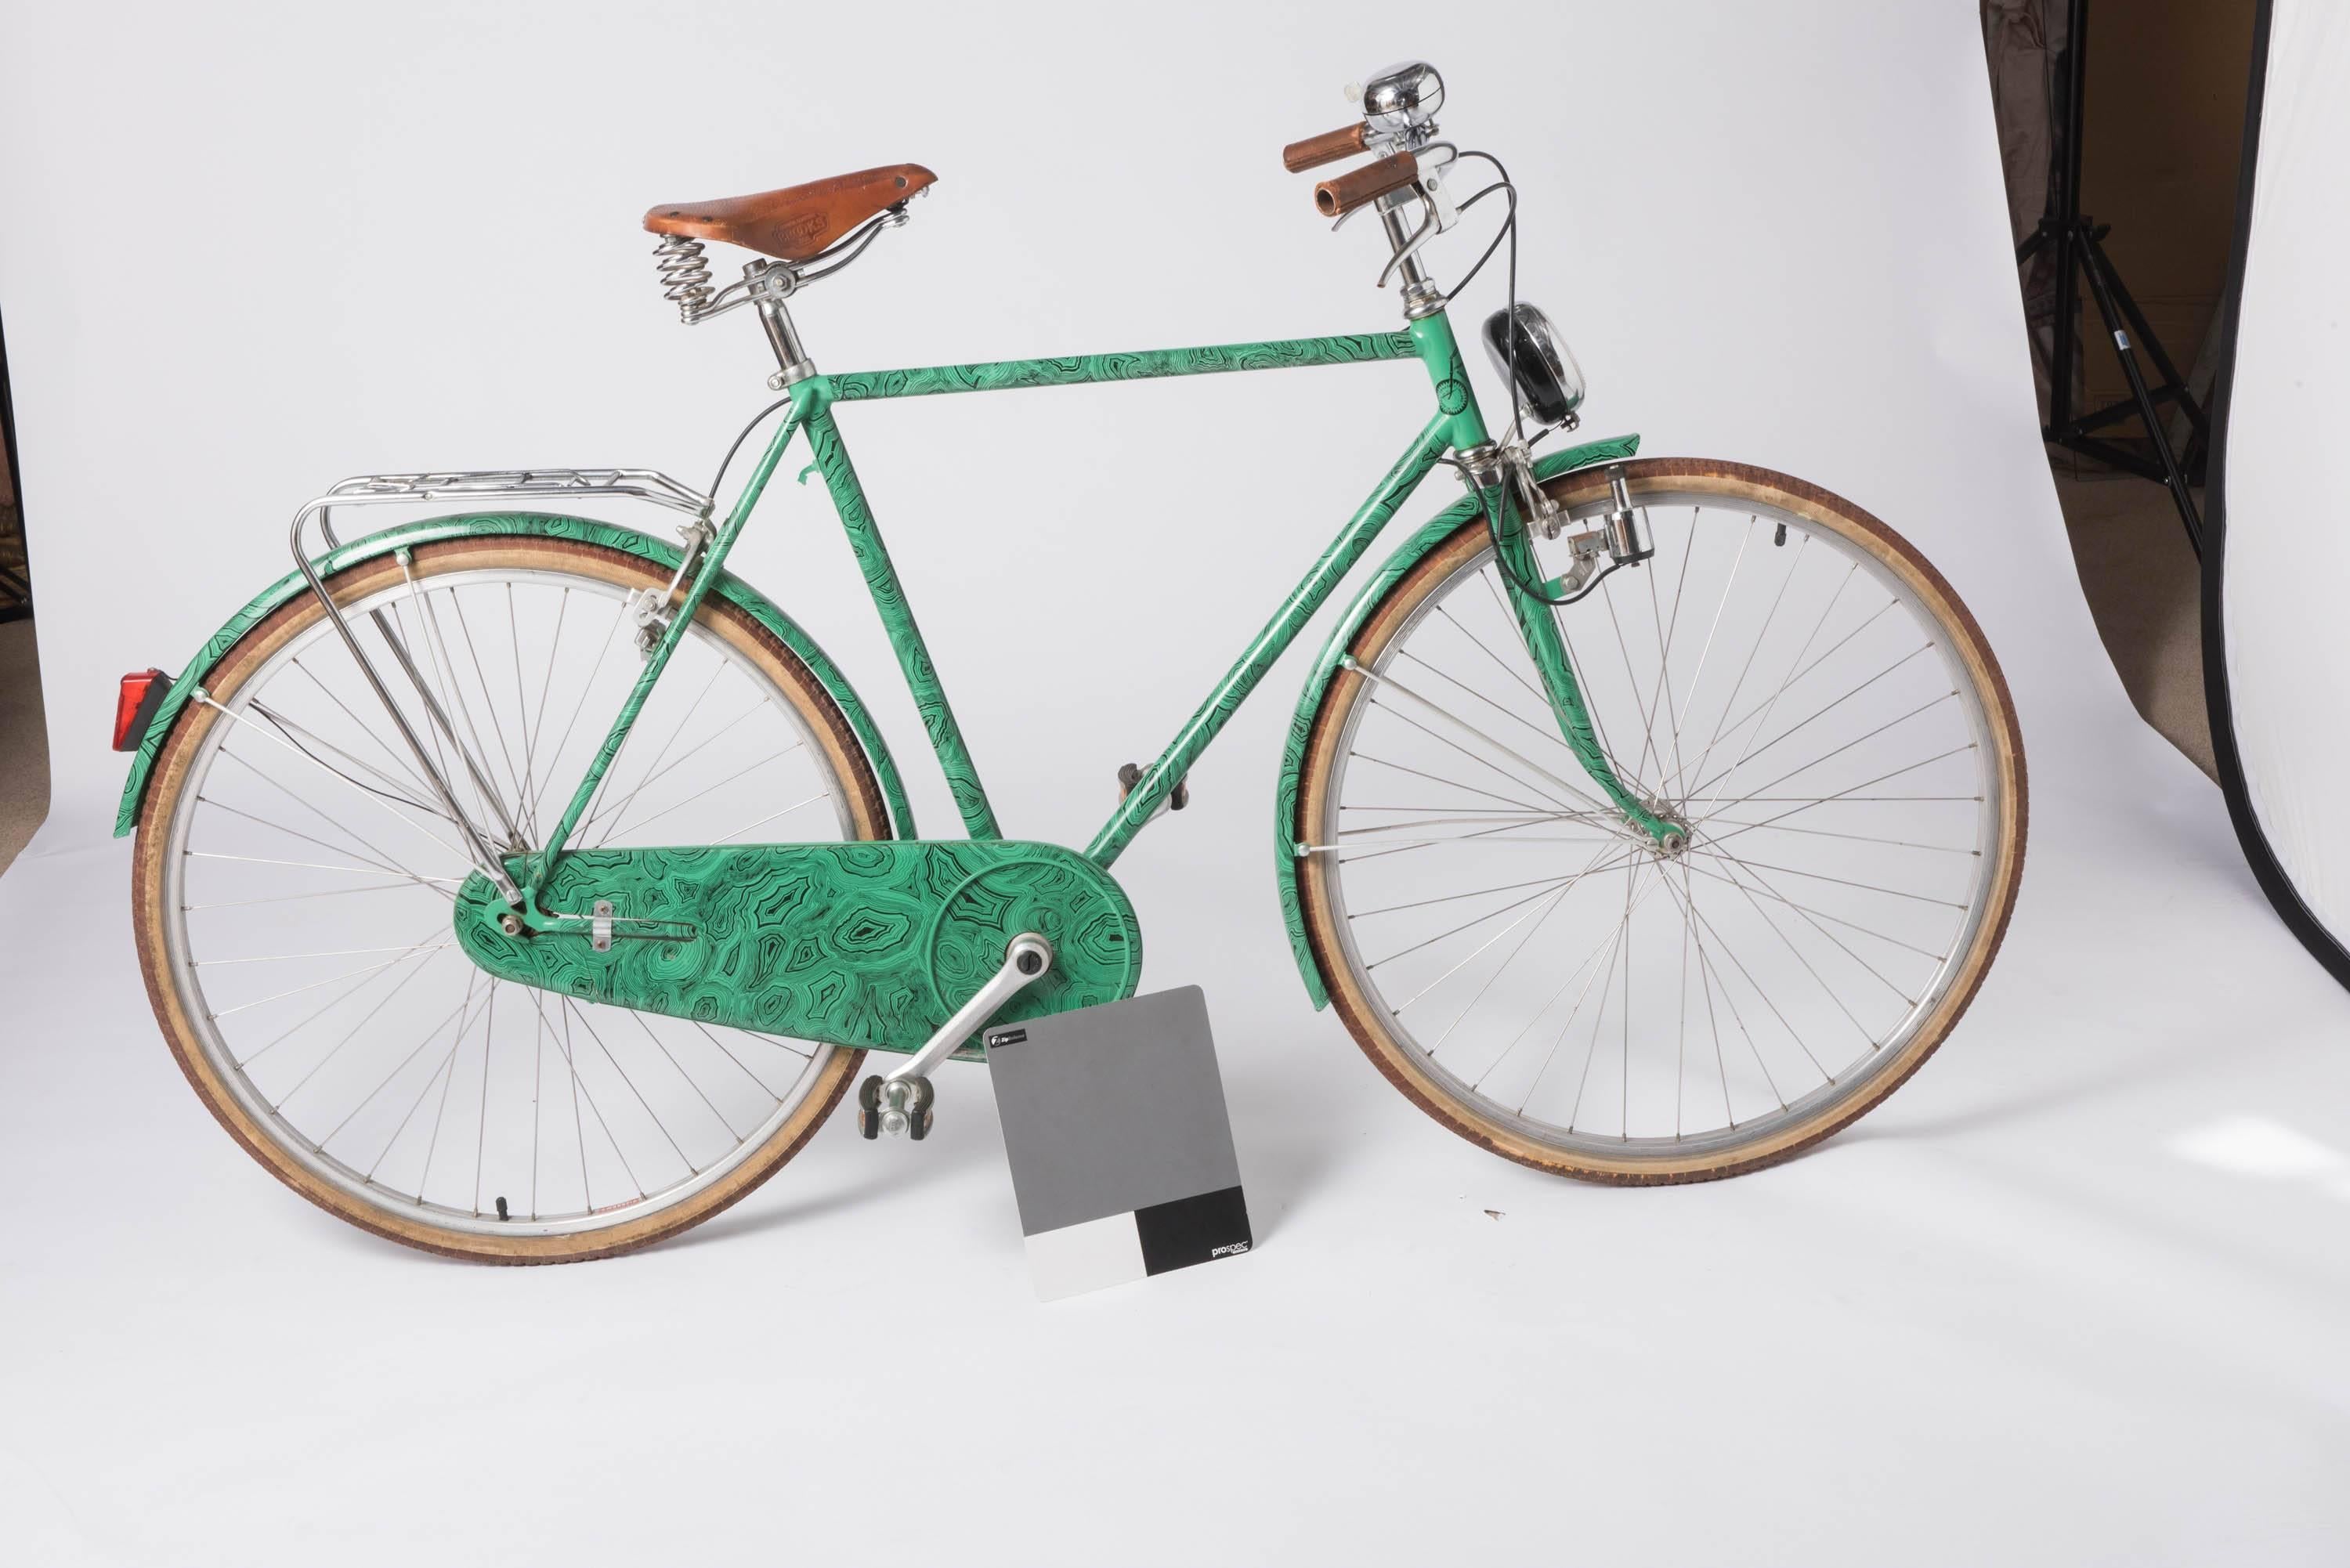 A very rare bicycle by Piero Fornasetti.
“Malachite”
Metal lithographically printed and hand coloured.
Frame tubing without visible joints.
Pedals without bolts on the pants protector plates
Handle bar grips and chair guard cover in hand-stitched